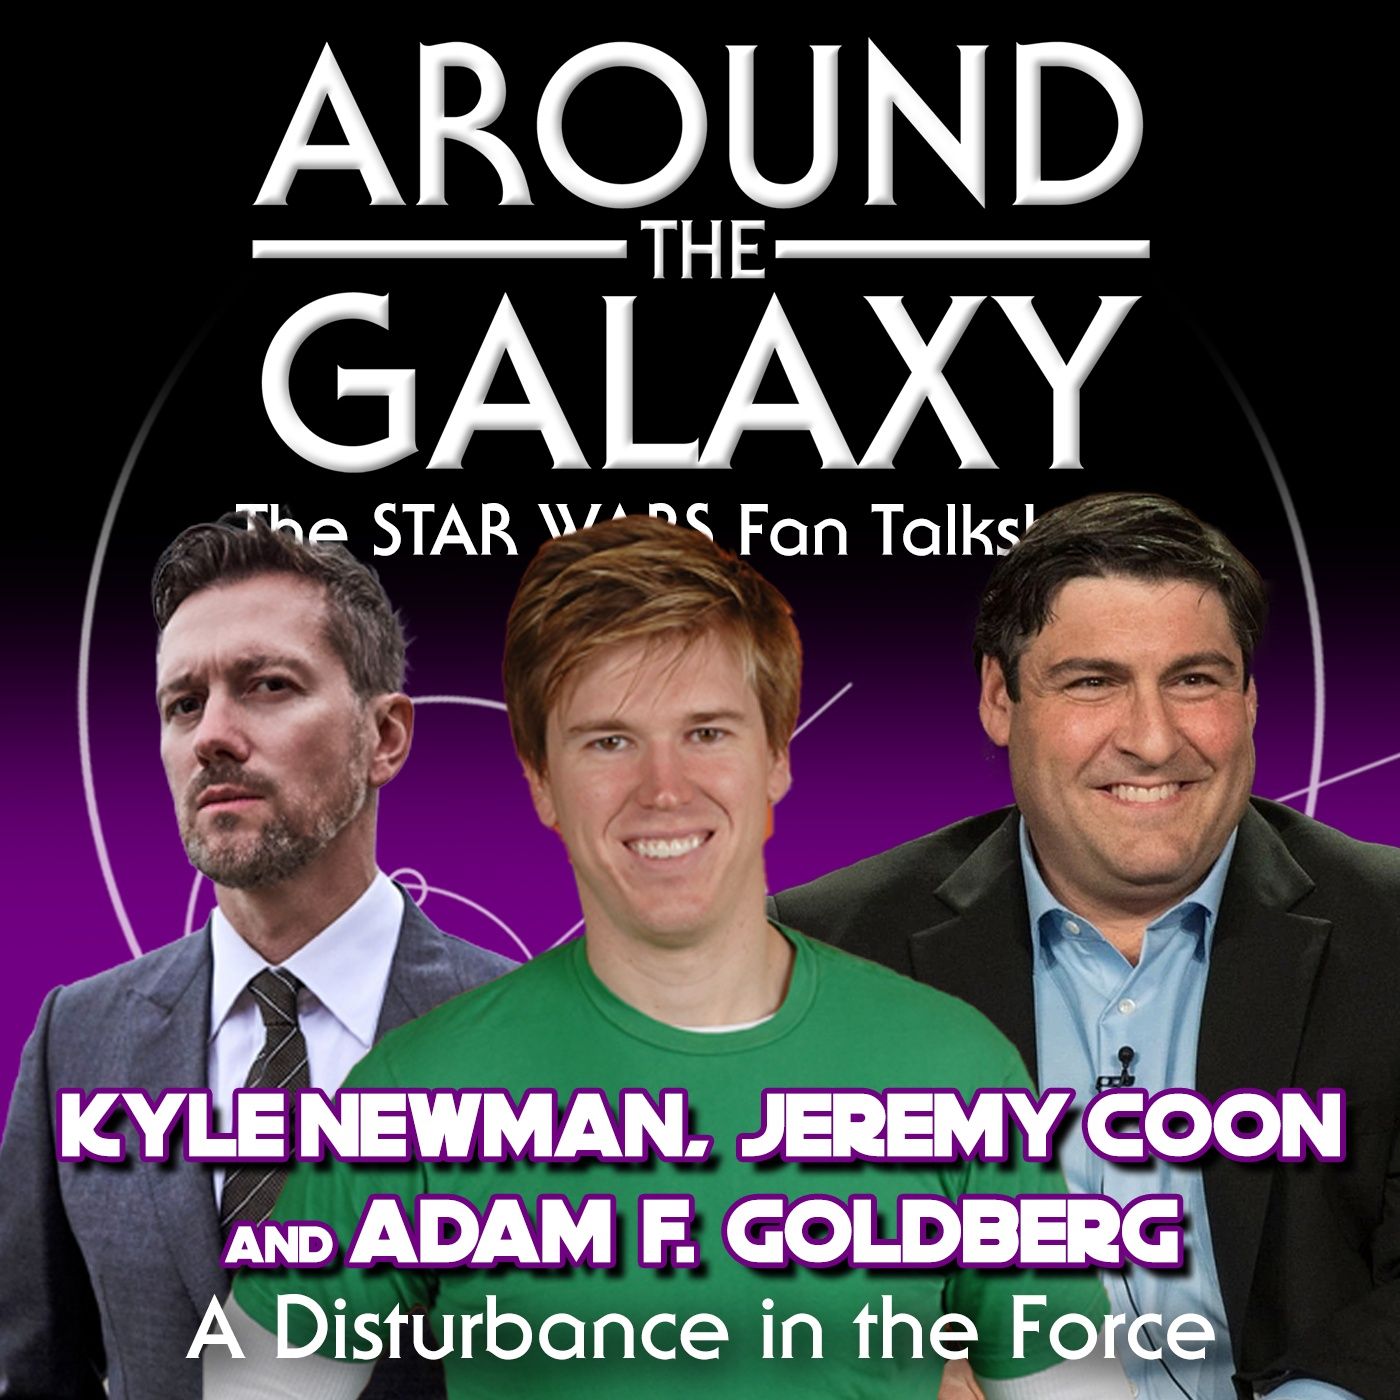 Adam F Goldberg, Kyle Newman, Jeremy Coon: A Disturbance in the Force